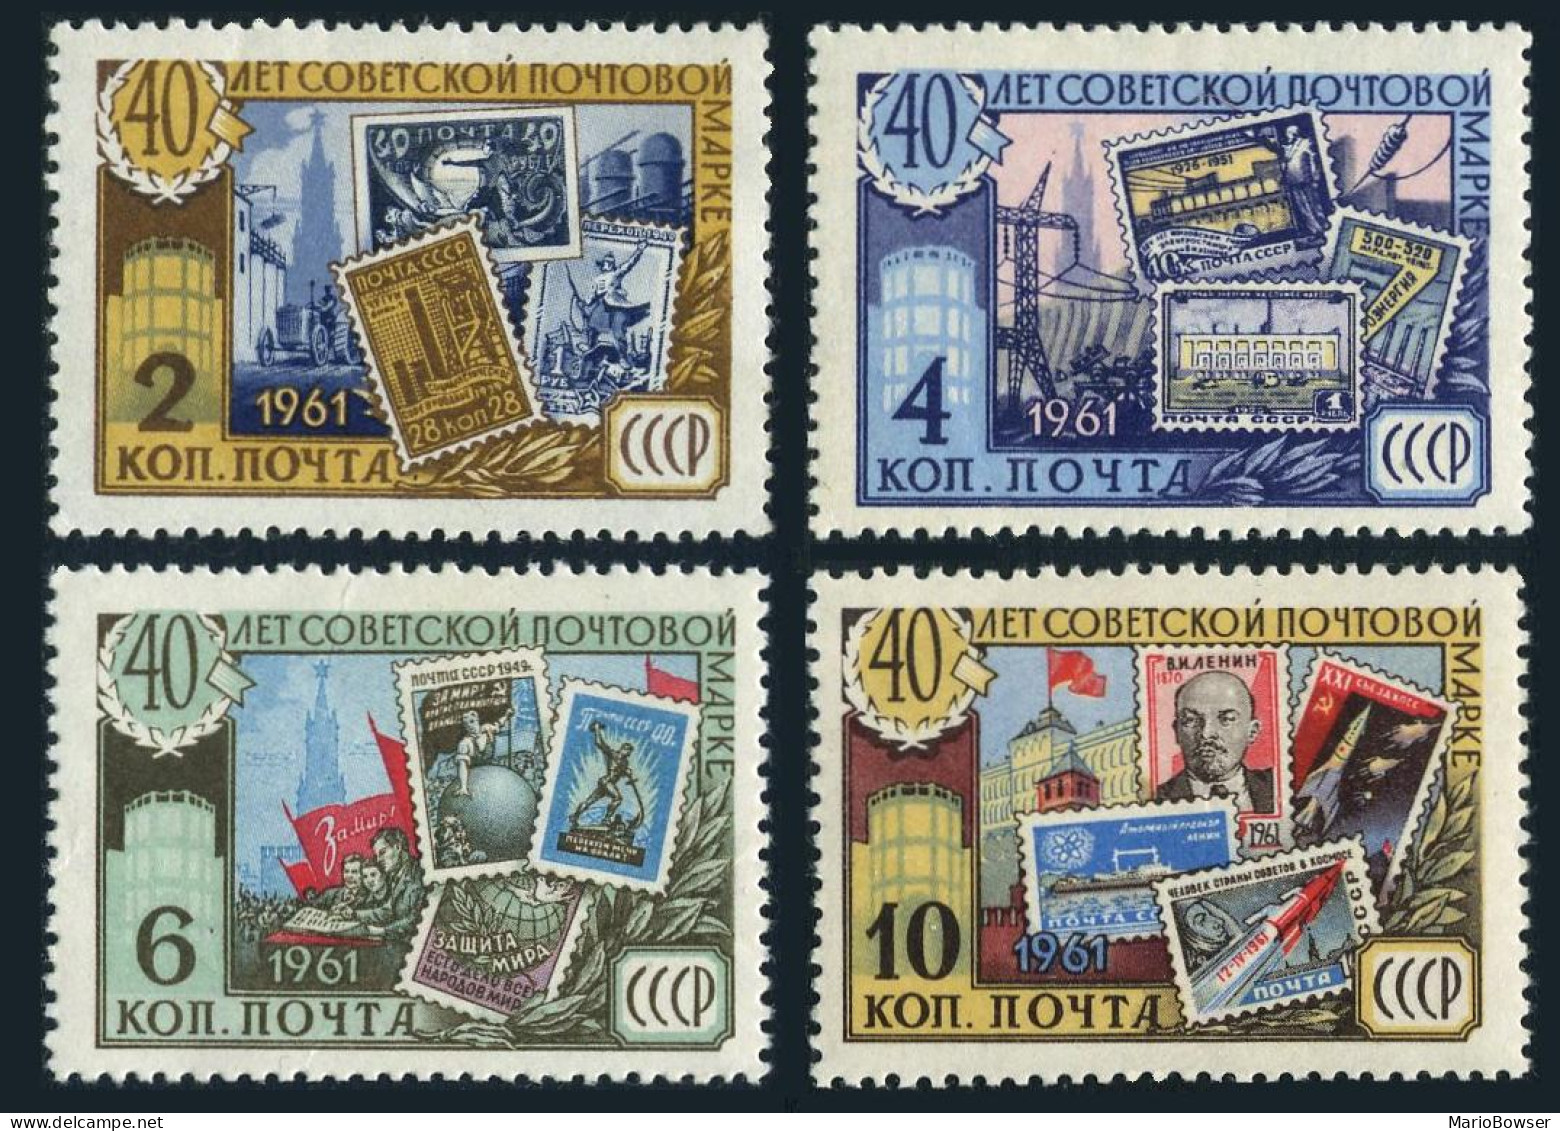 Russia 2516-2519,MNH.Michel 2517-2520. Soviet Postage Stamps,40,1961.Lenin,space - Neufs